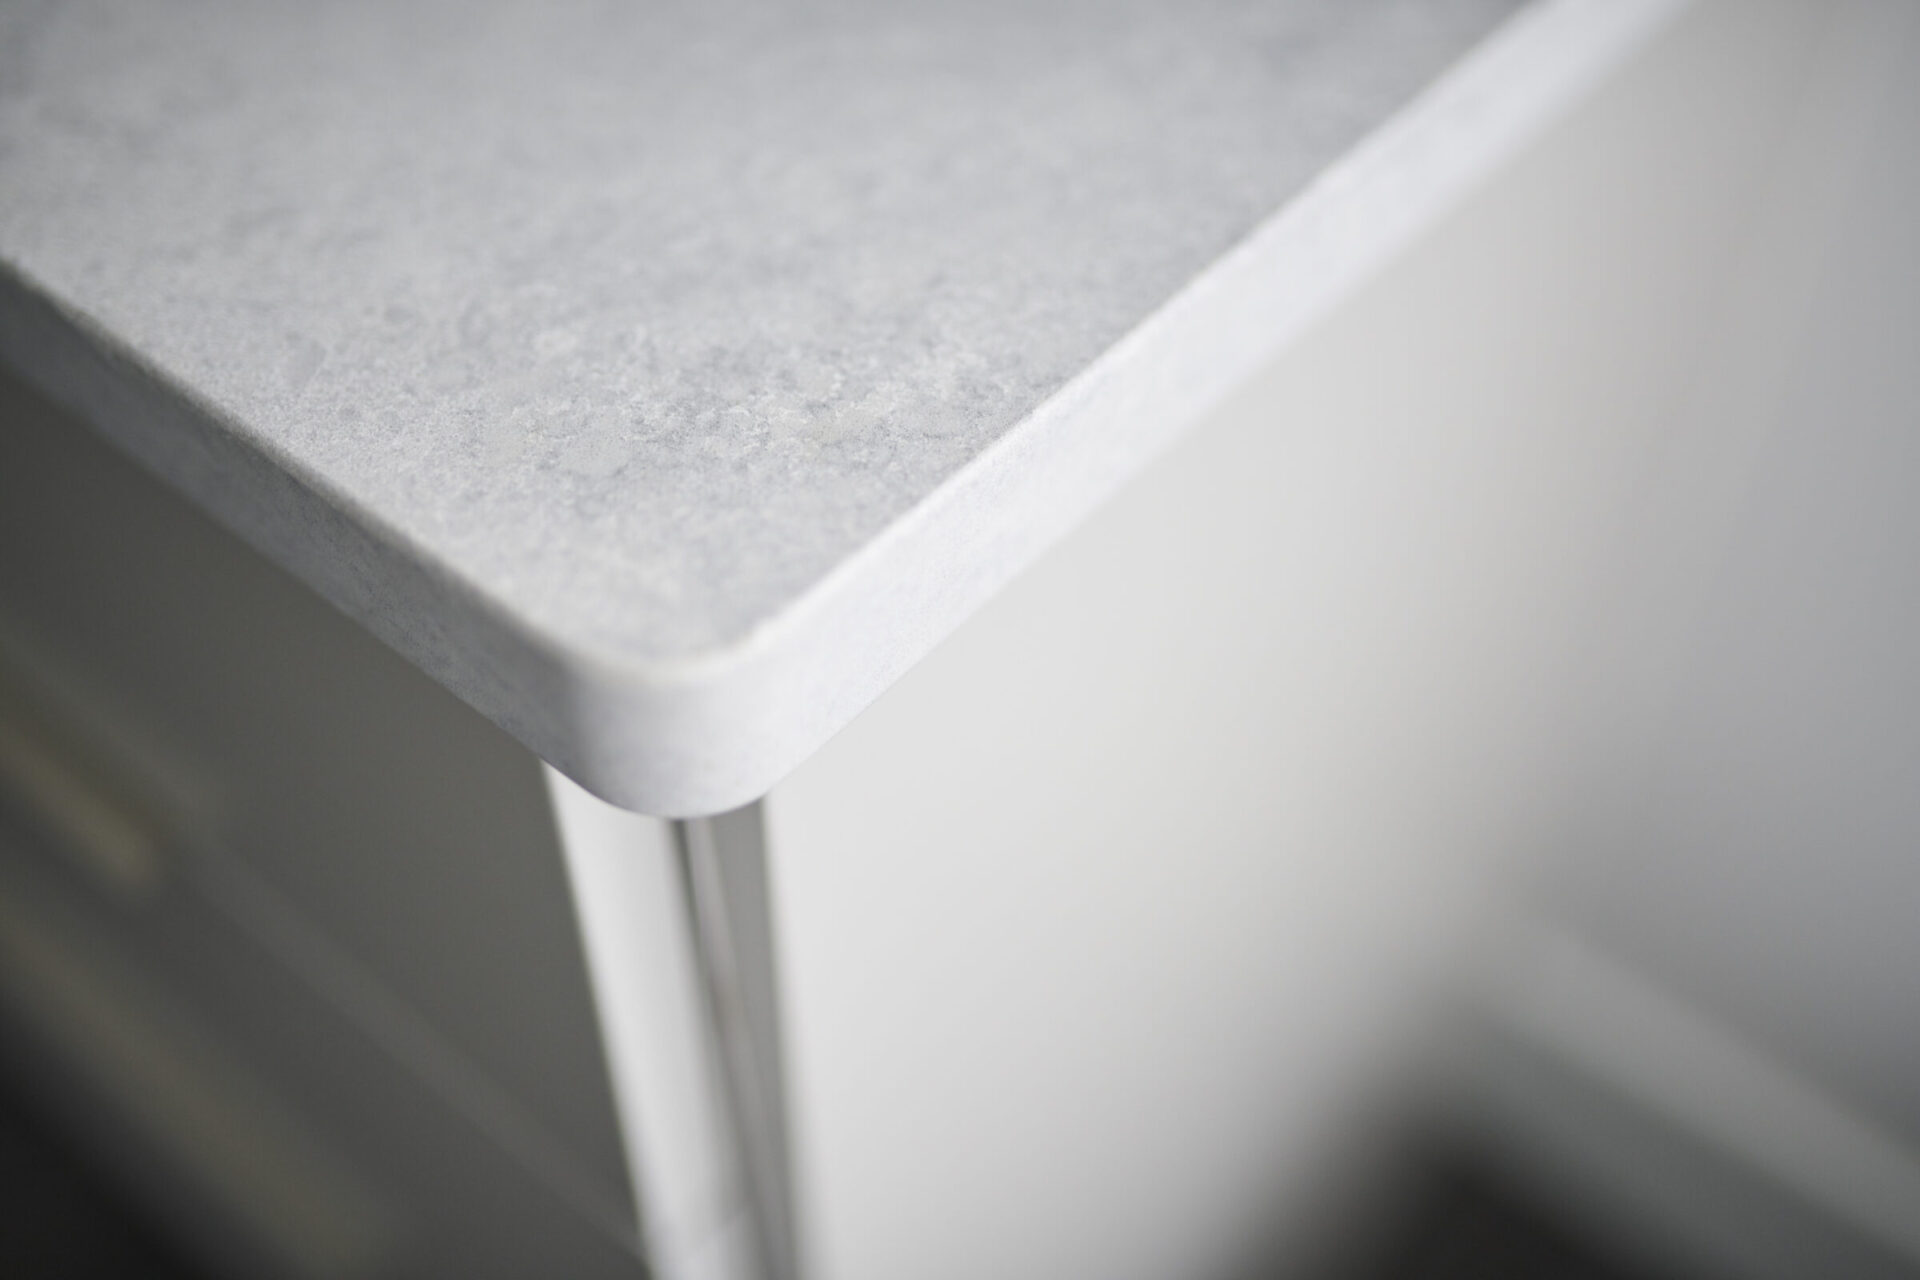 This image shows a close-up of a countertop corner with a subtle rounded edge, featuring a textured surface in soft lighting with a diffuse background.